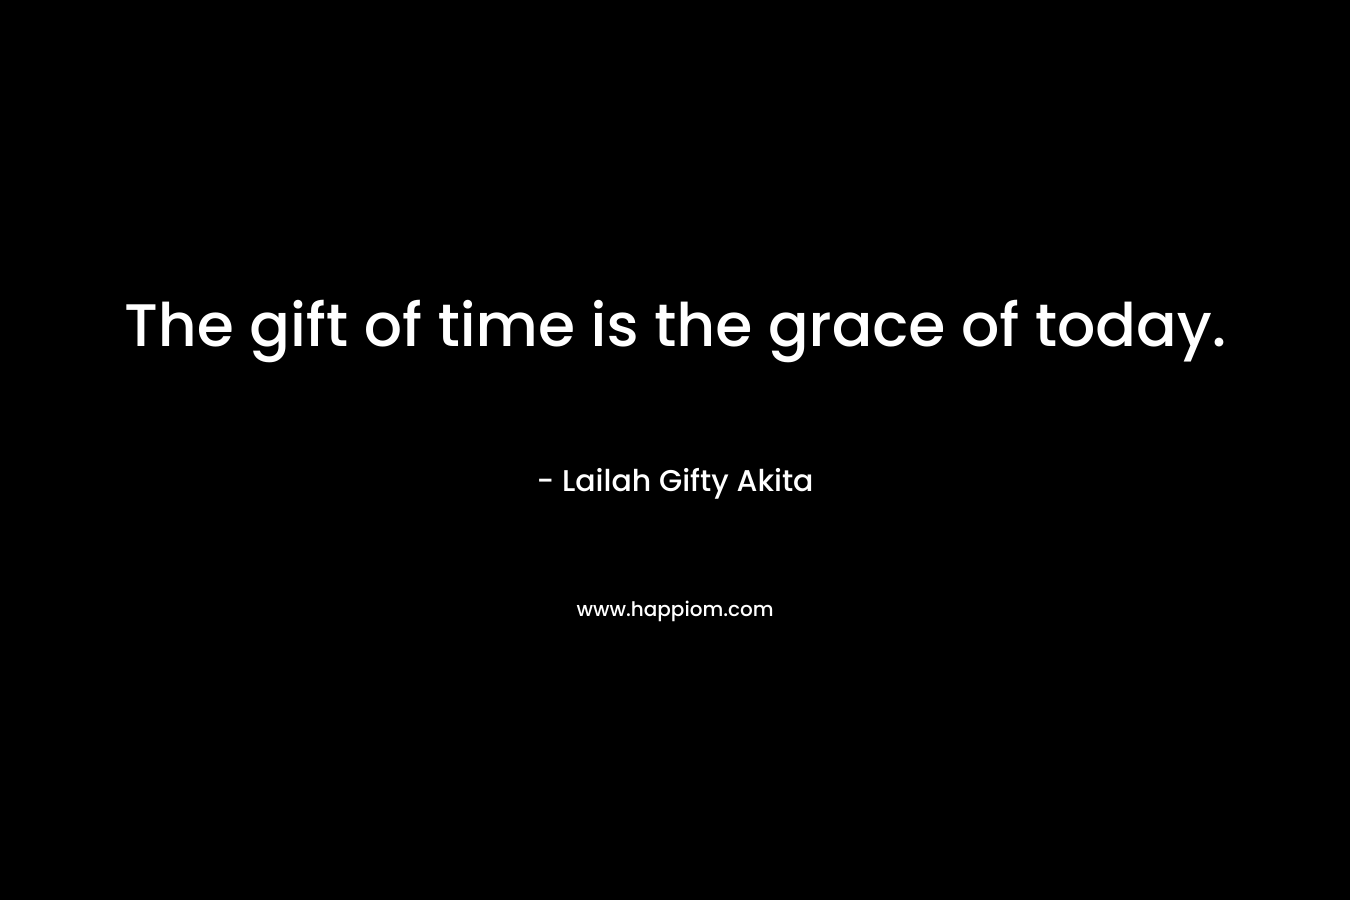 The gift of time is the grace of today.